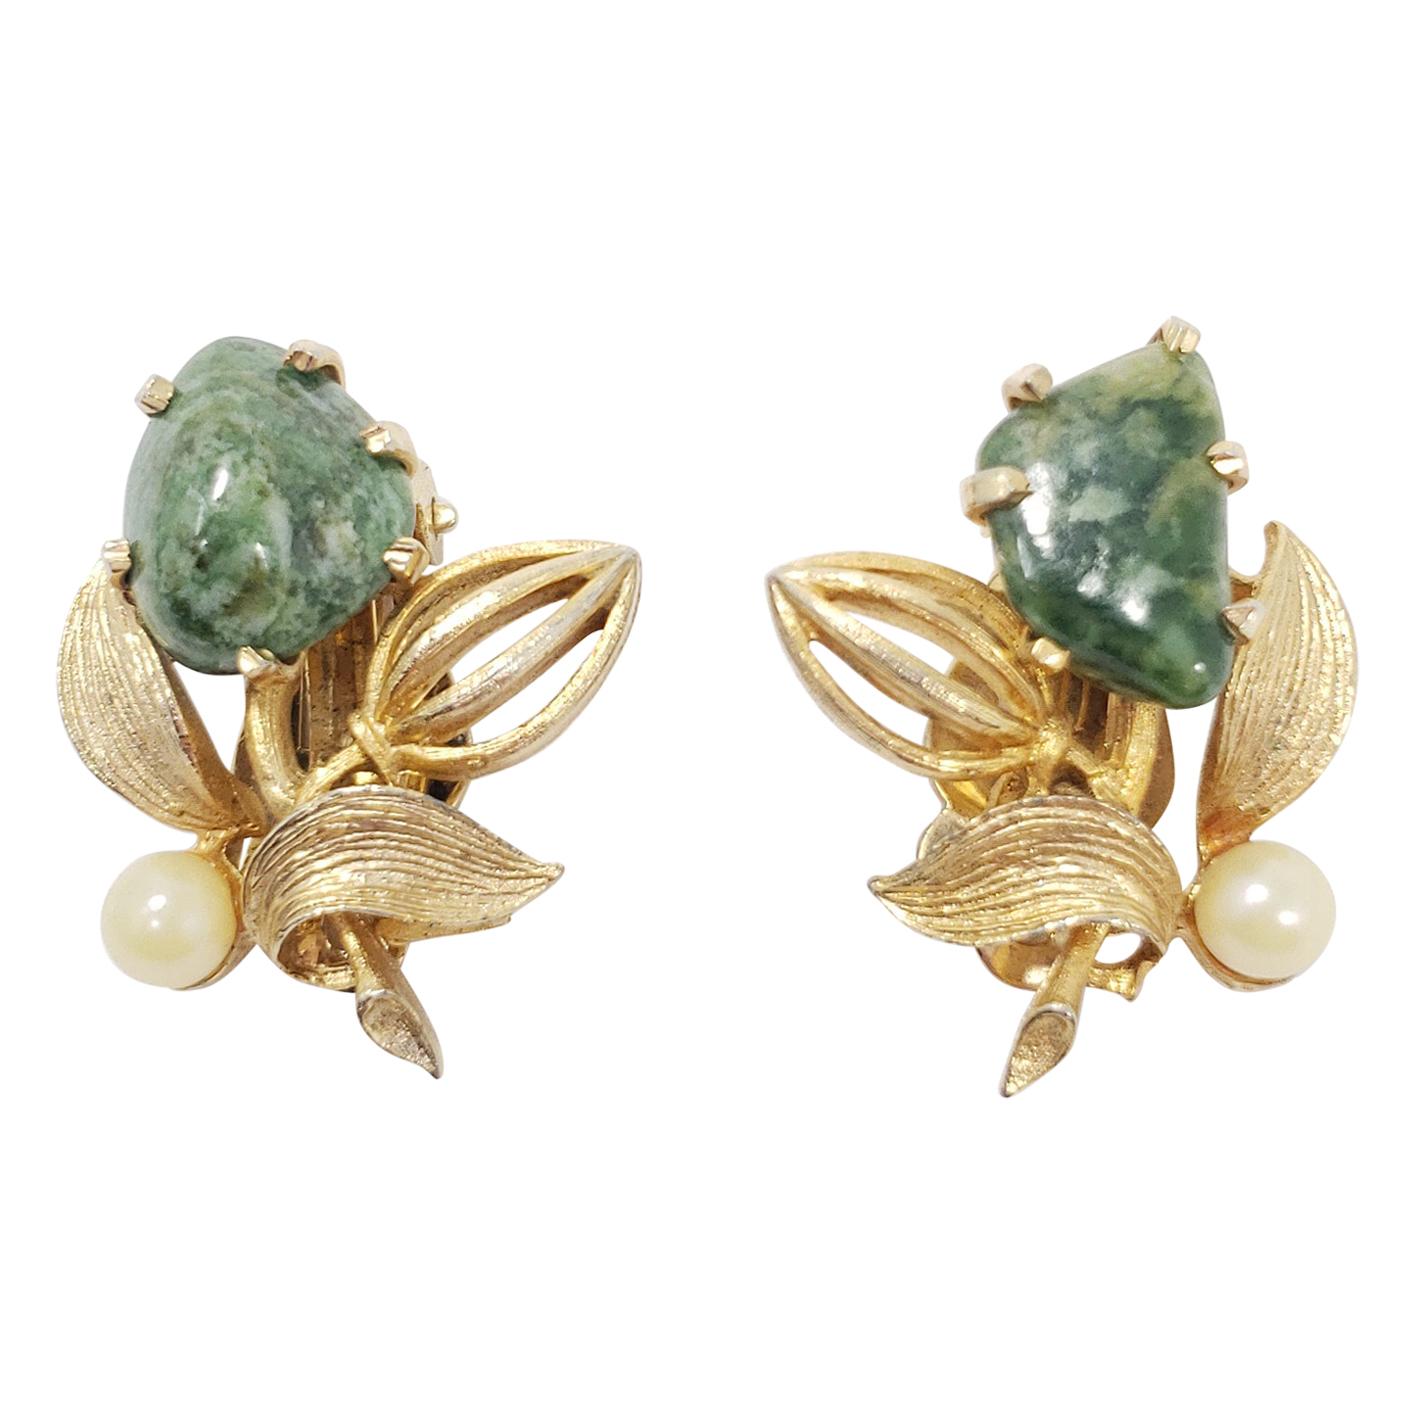 Lisner Vintage Floral Faux Pearl and Malachite Clip on Earrings in Gold